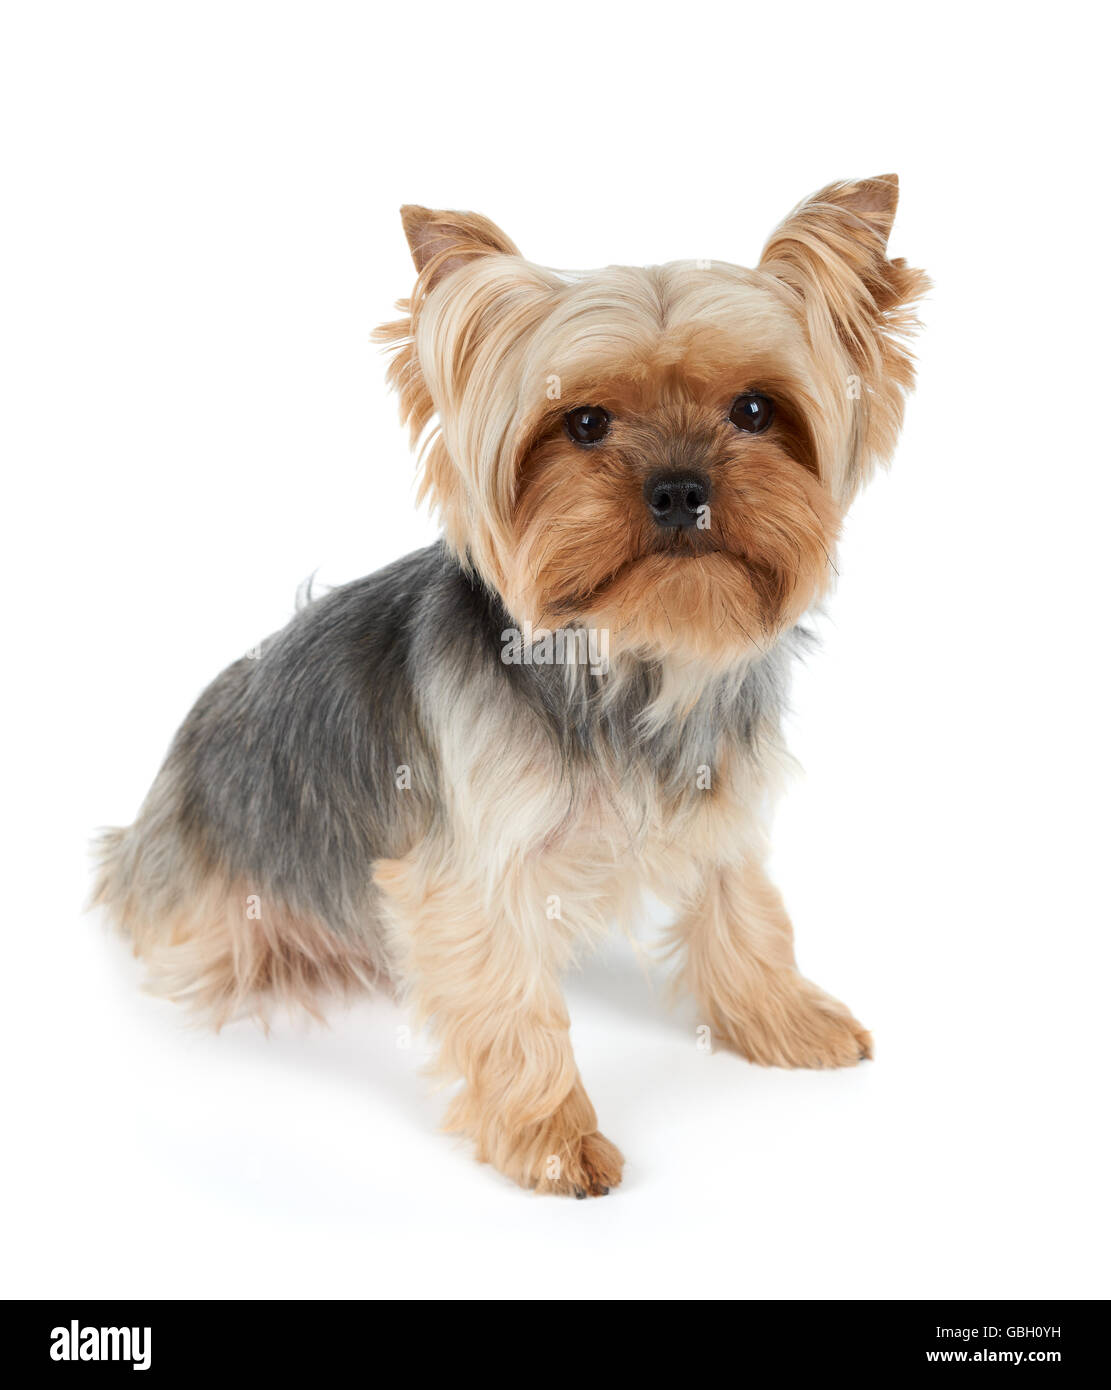 One Yorkshire Terrier with haircut looking at camera Stock Photo